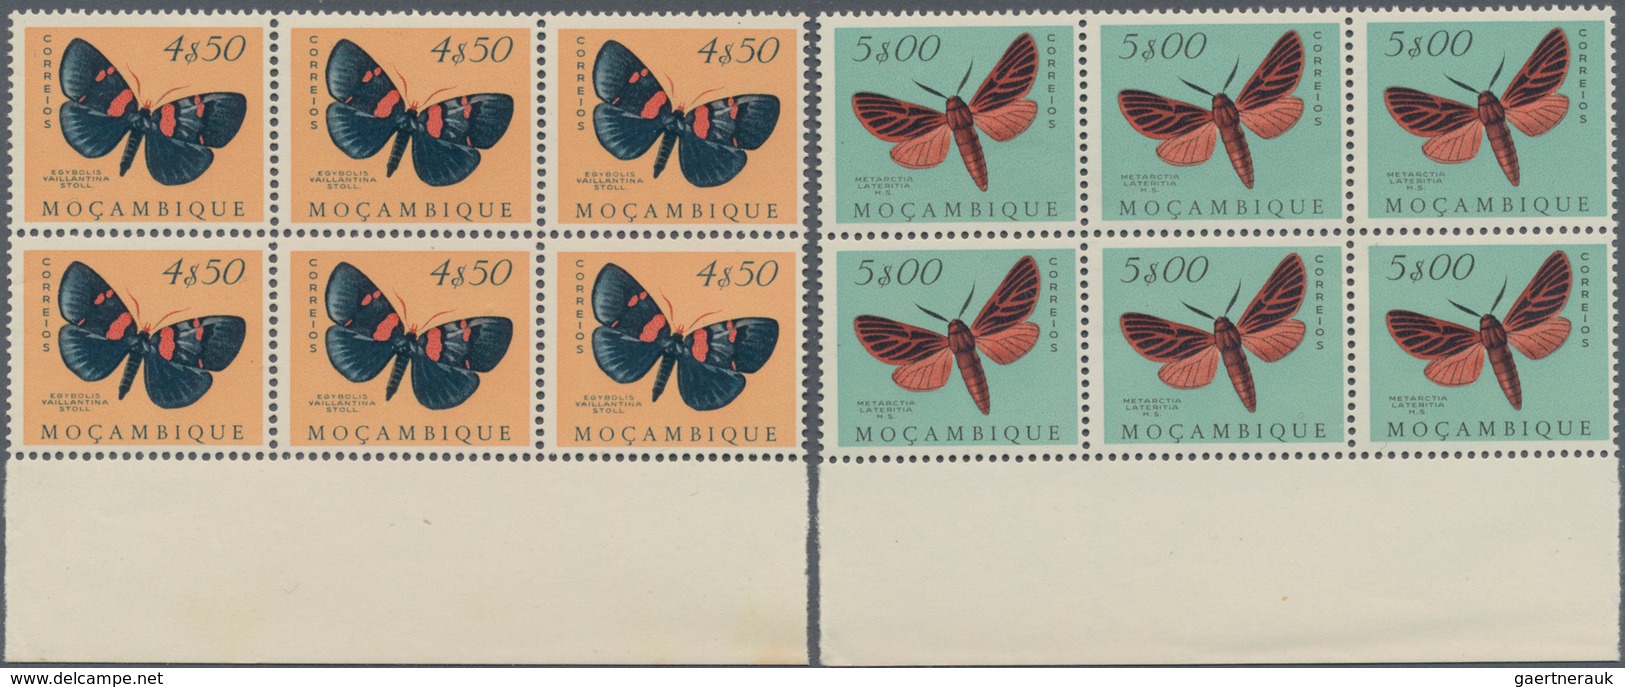 Mocambique: 1953, butterflies, 20 values in blocks of six mint never hinged. Rare set! Michel catalo